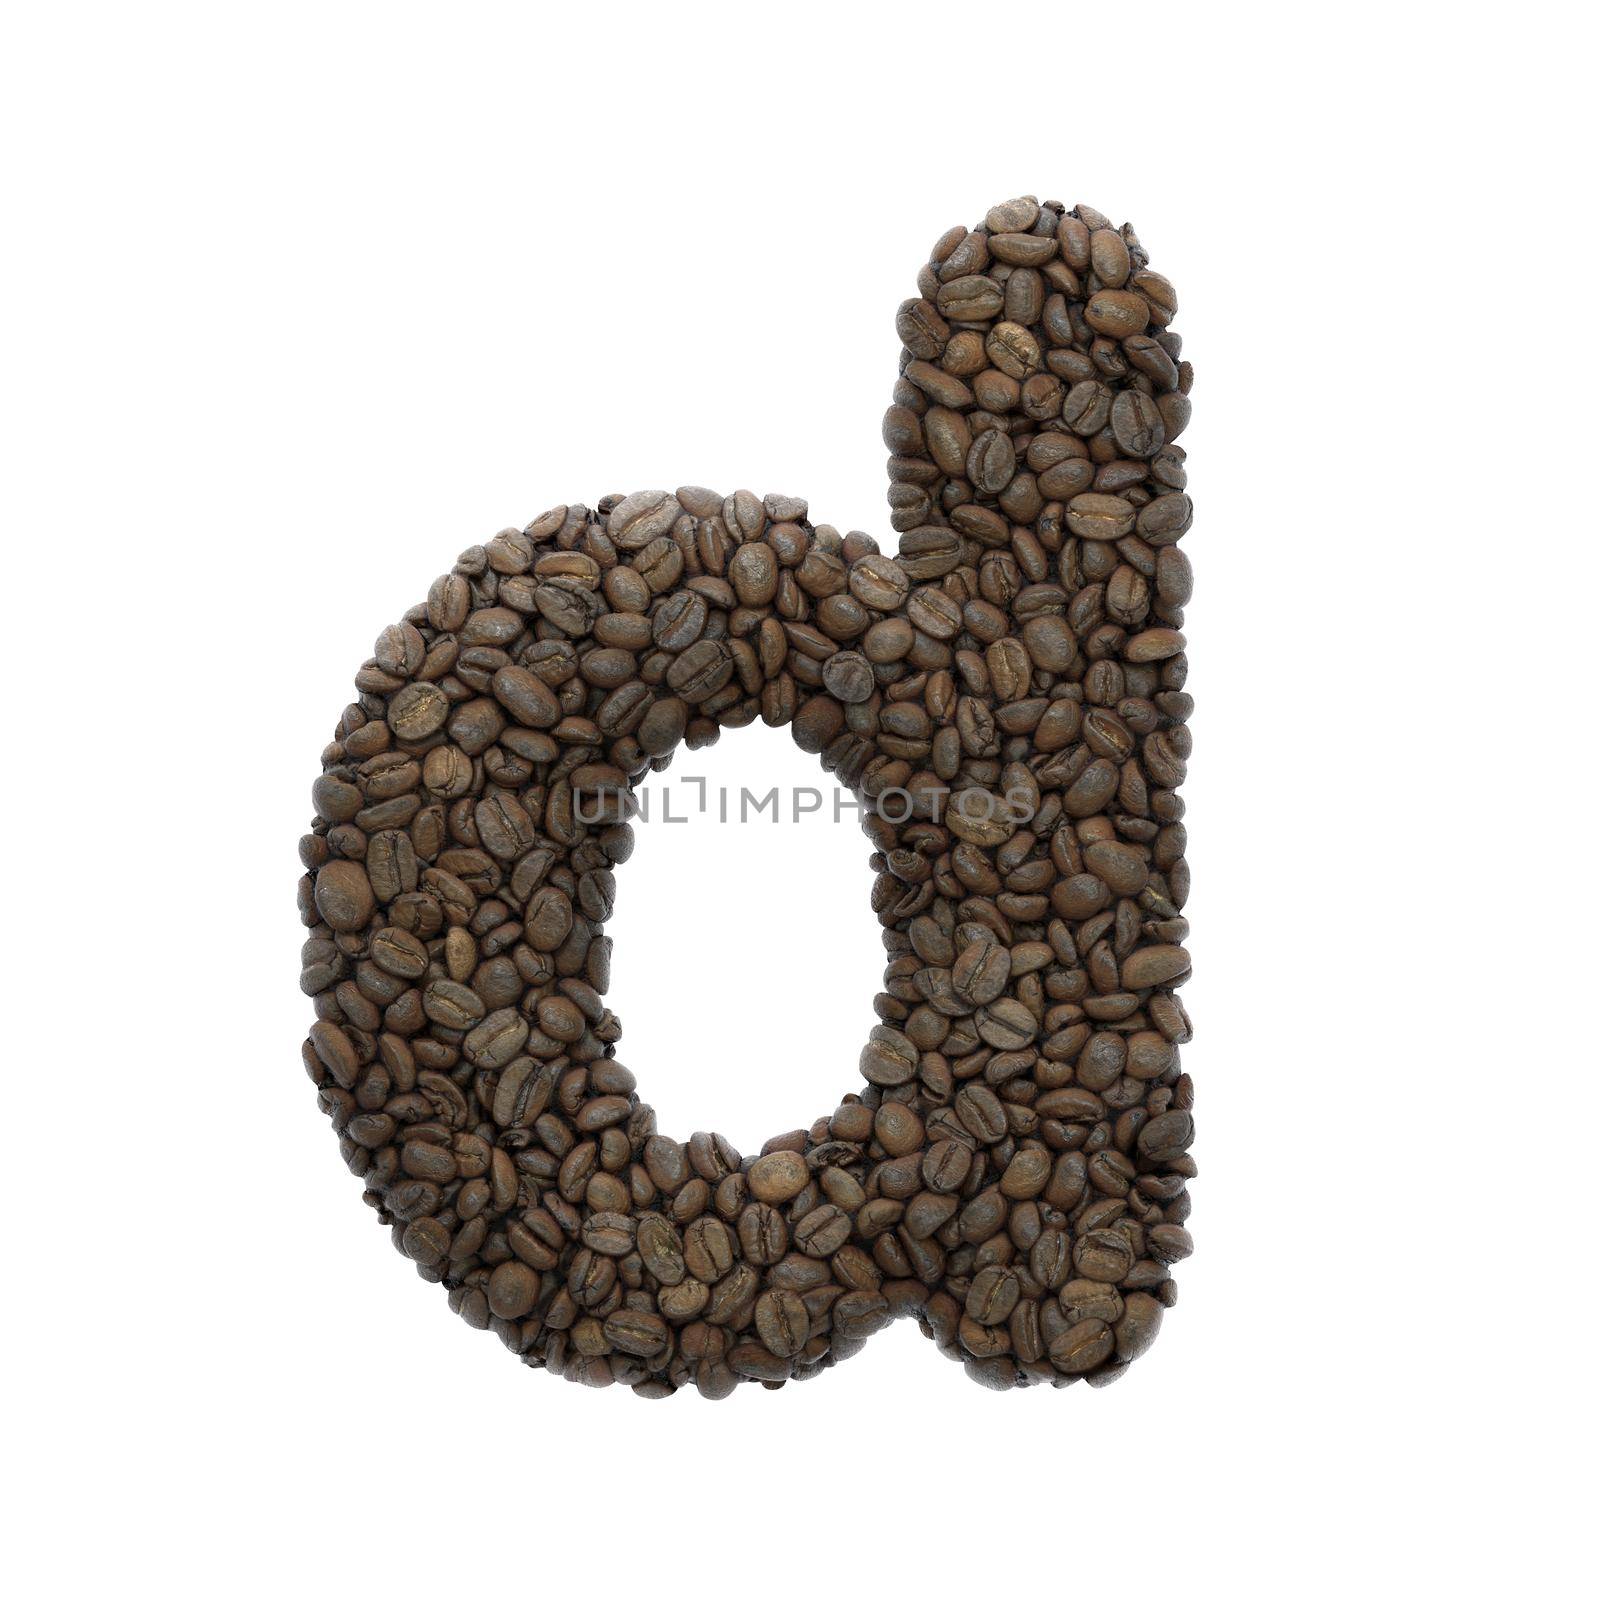 Coffee letter D - Lowercase 3d roasted beans font - Suitable for Coffee, energy or insomnia related subjects by chrisroll